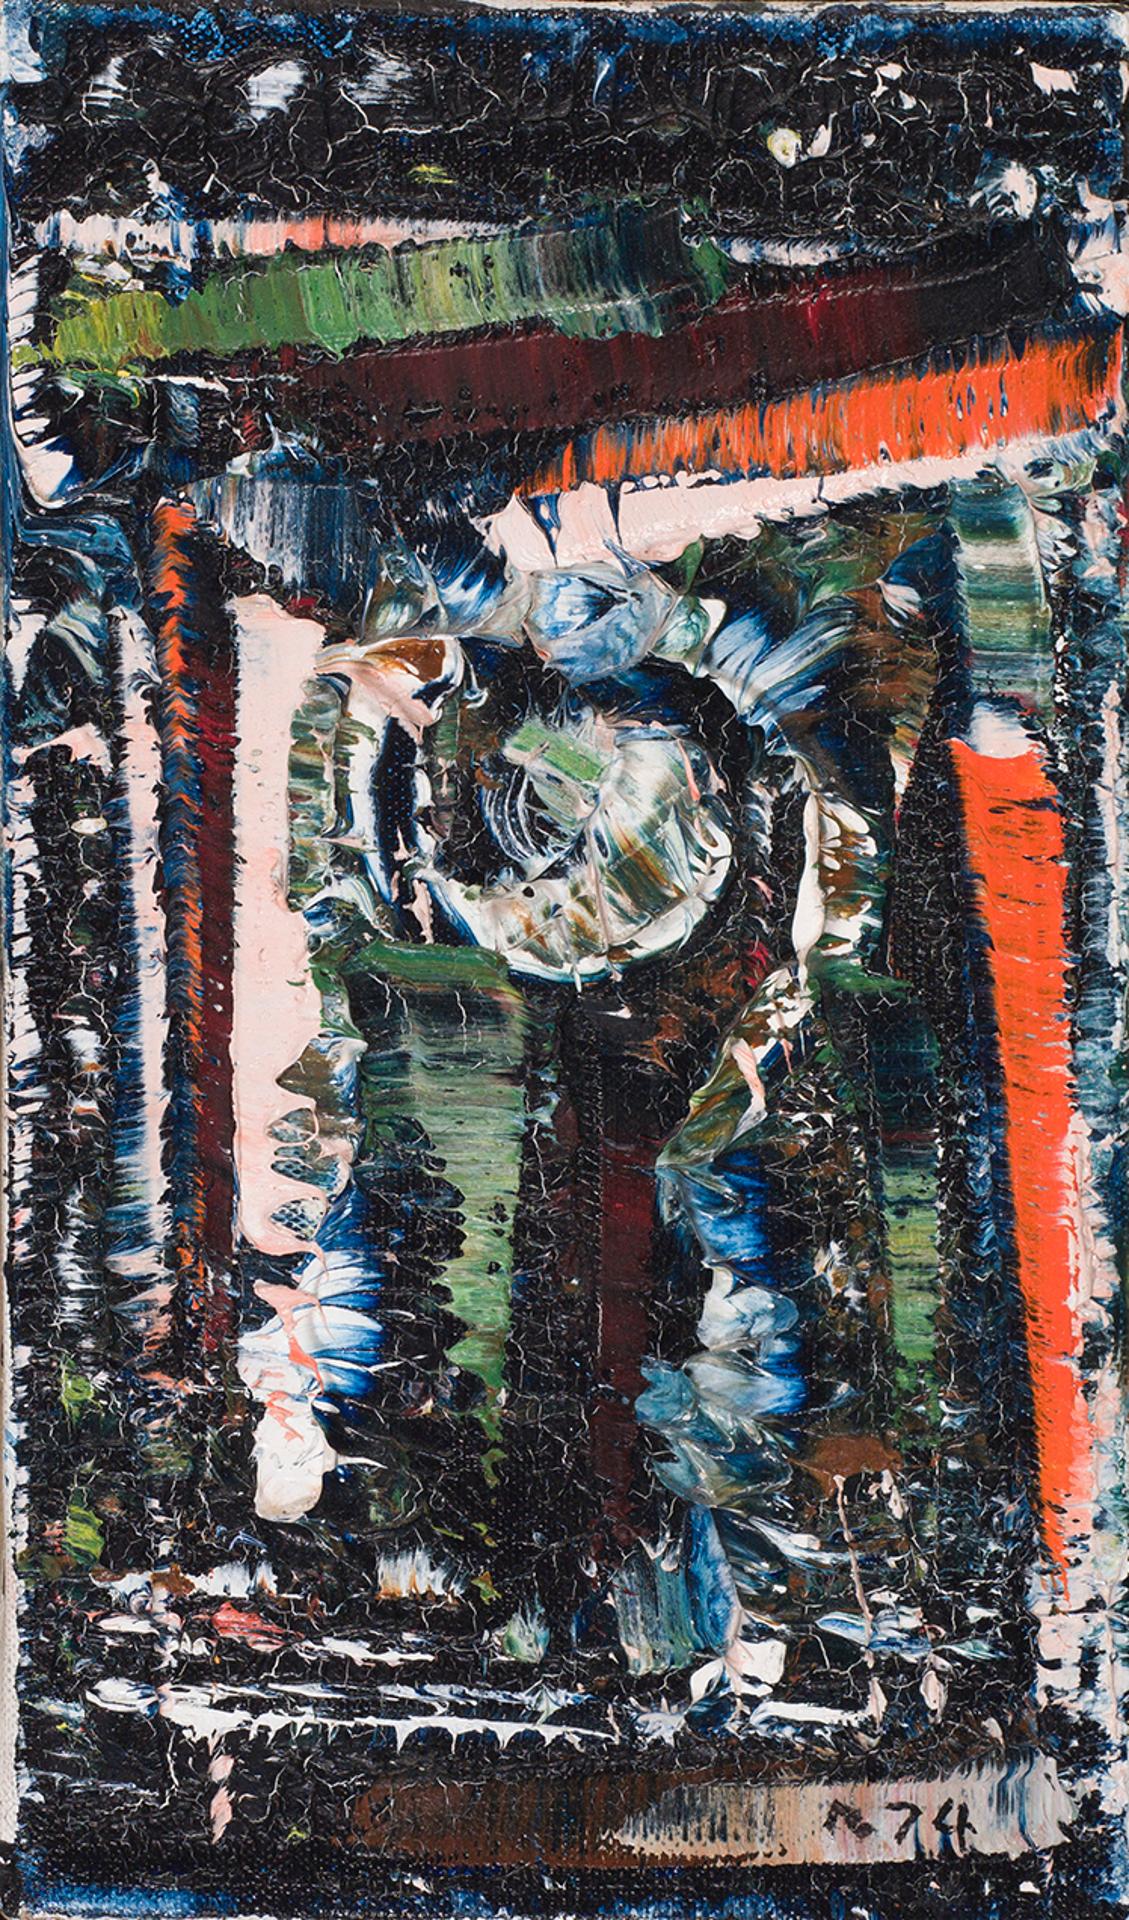 Jean-Paul Riopelle (1923-2002) - Vers l'ours